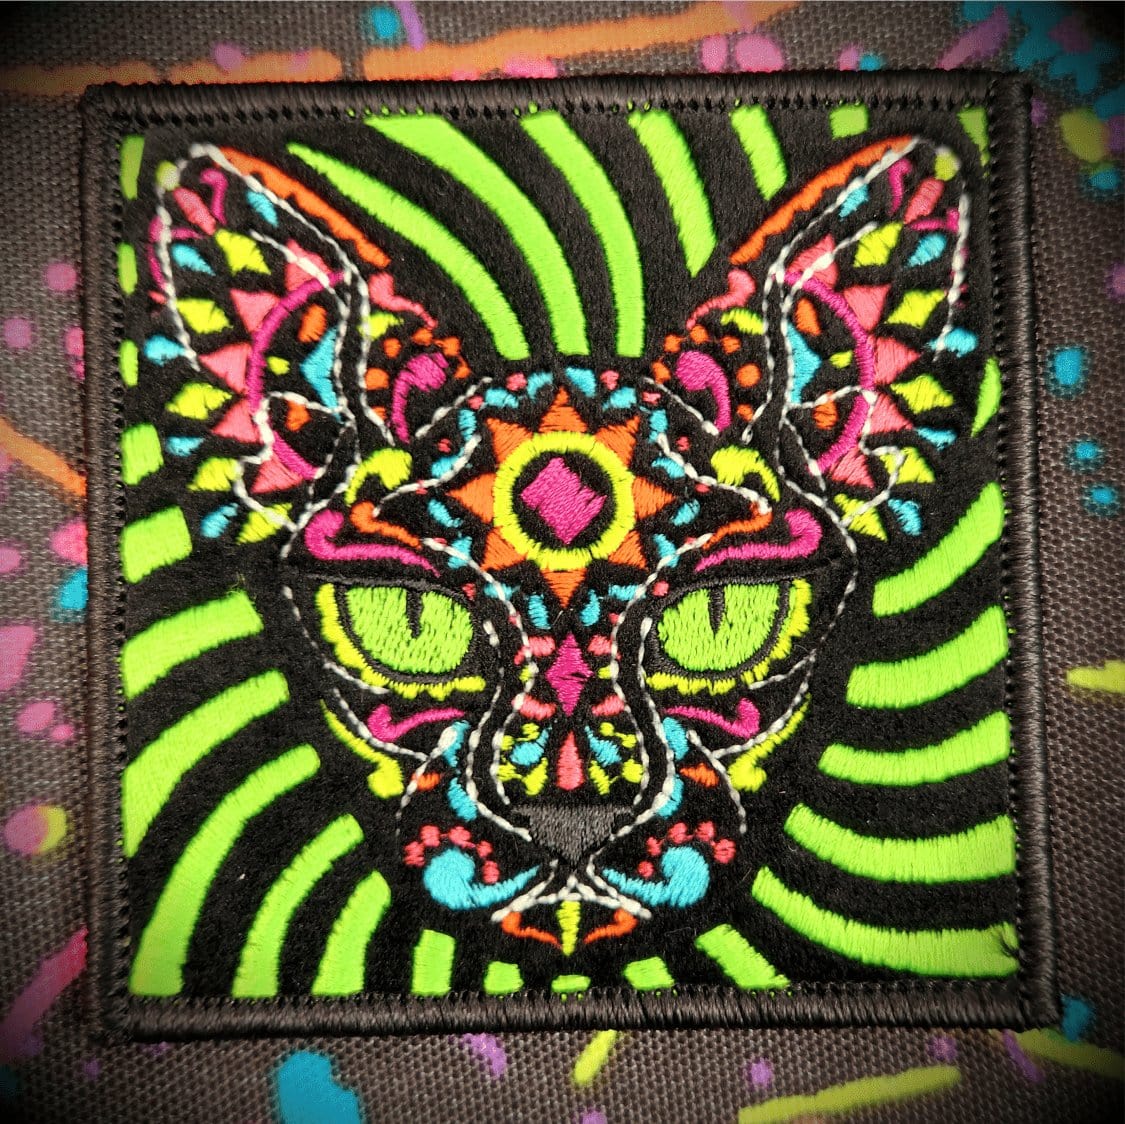 Tactical Gear Junkie Patches Blacklight Cat Patch - Amp Up Your Wardrobe with an Trippy Eye-Catching Fluorescent Thread Magic